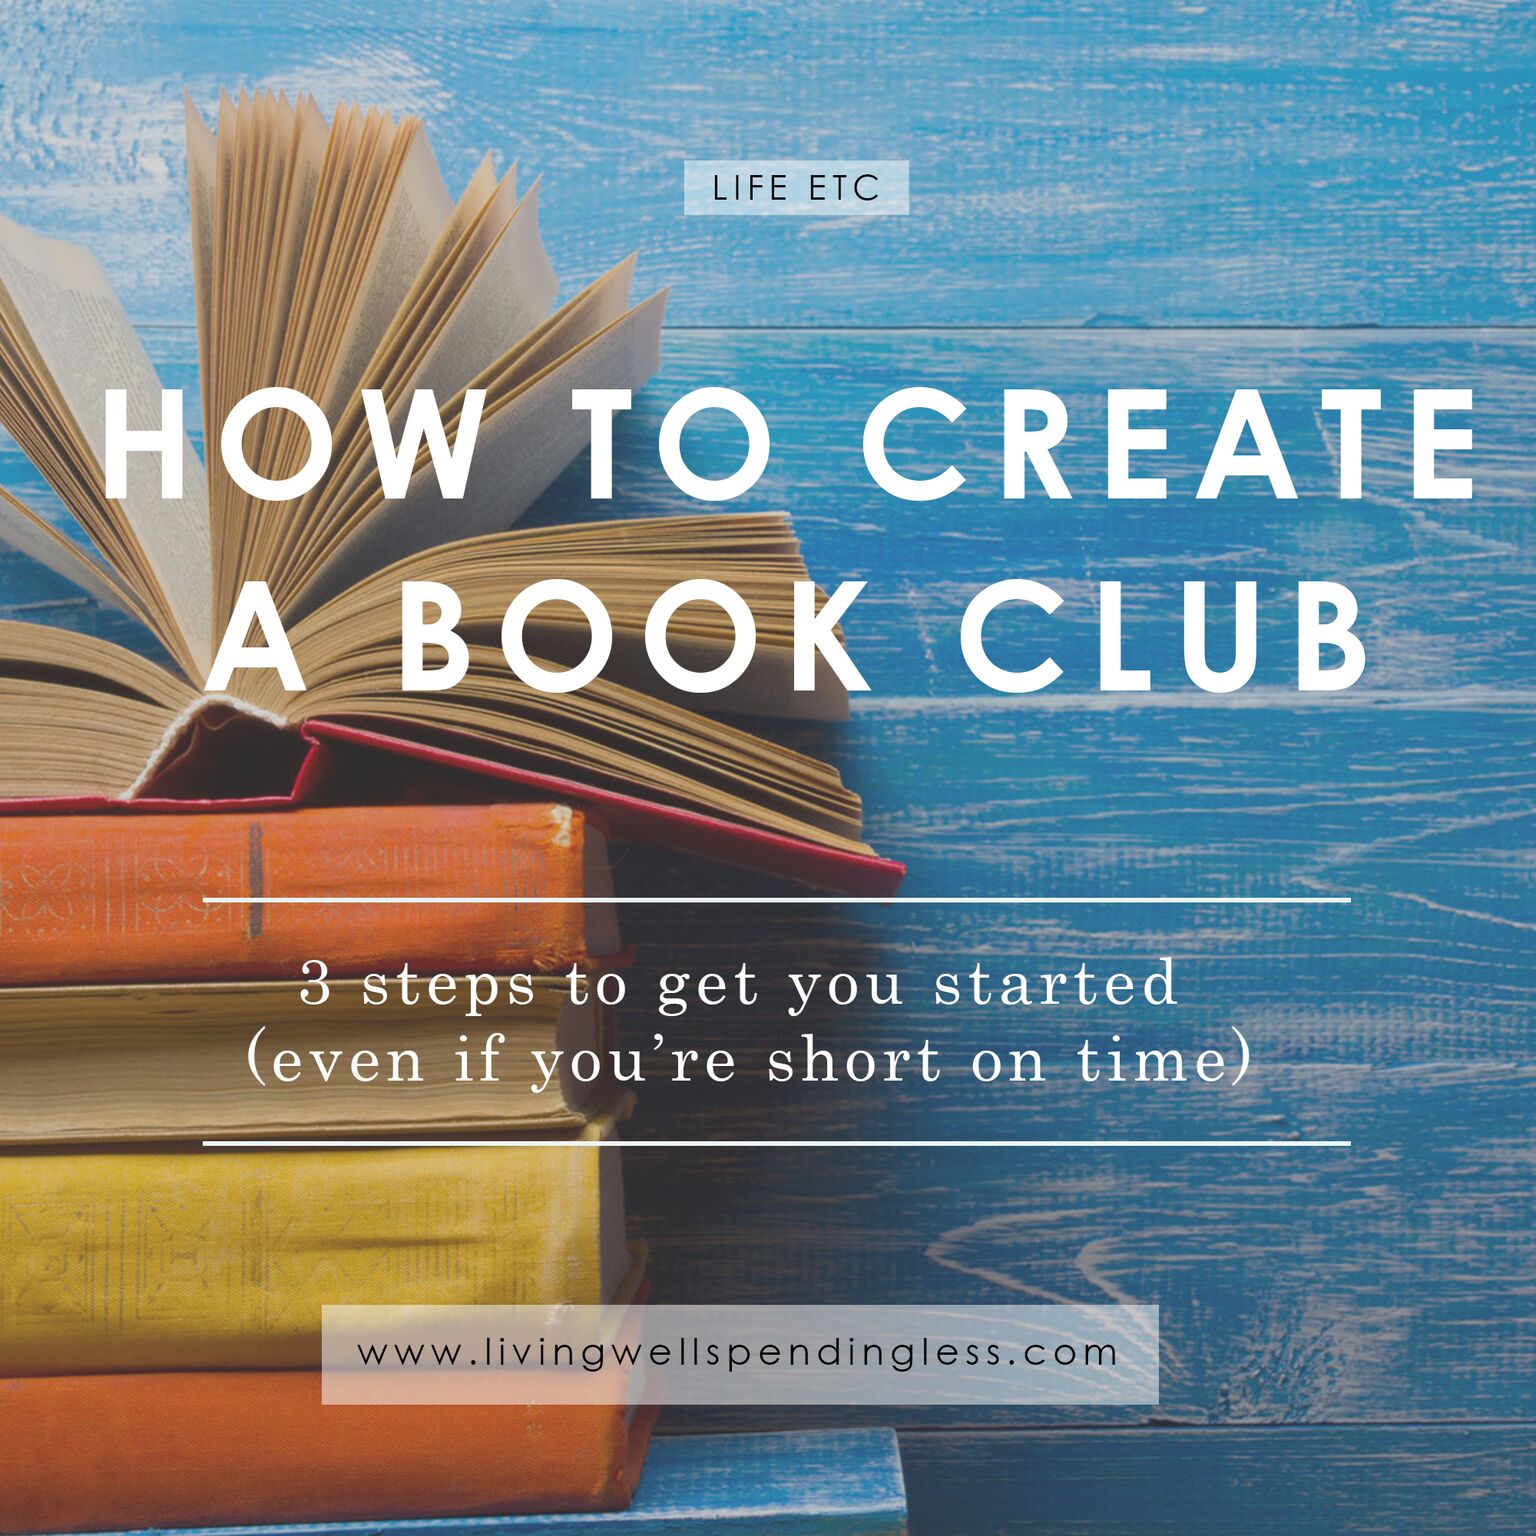 How to Create a Book Club | 4 Essential Tips to Getting Started